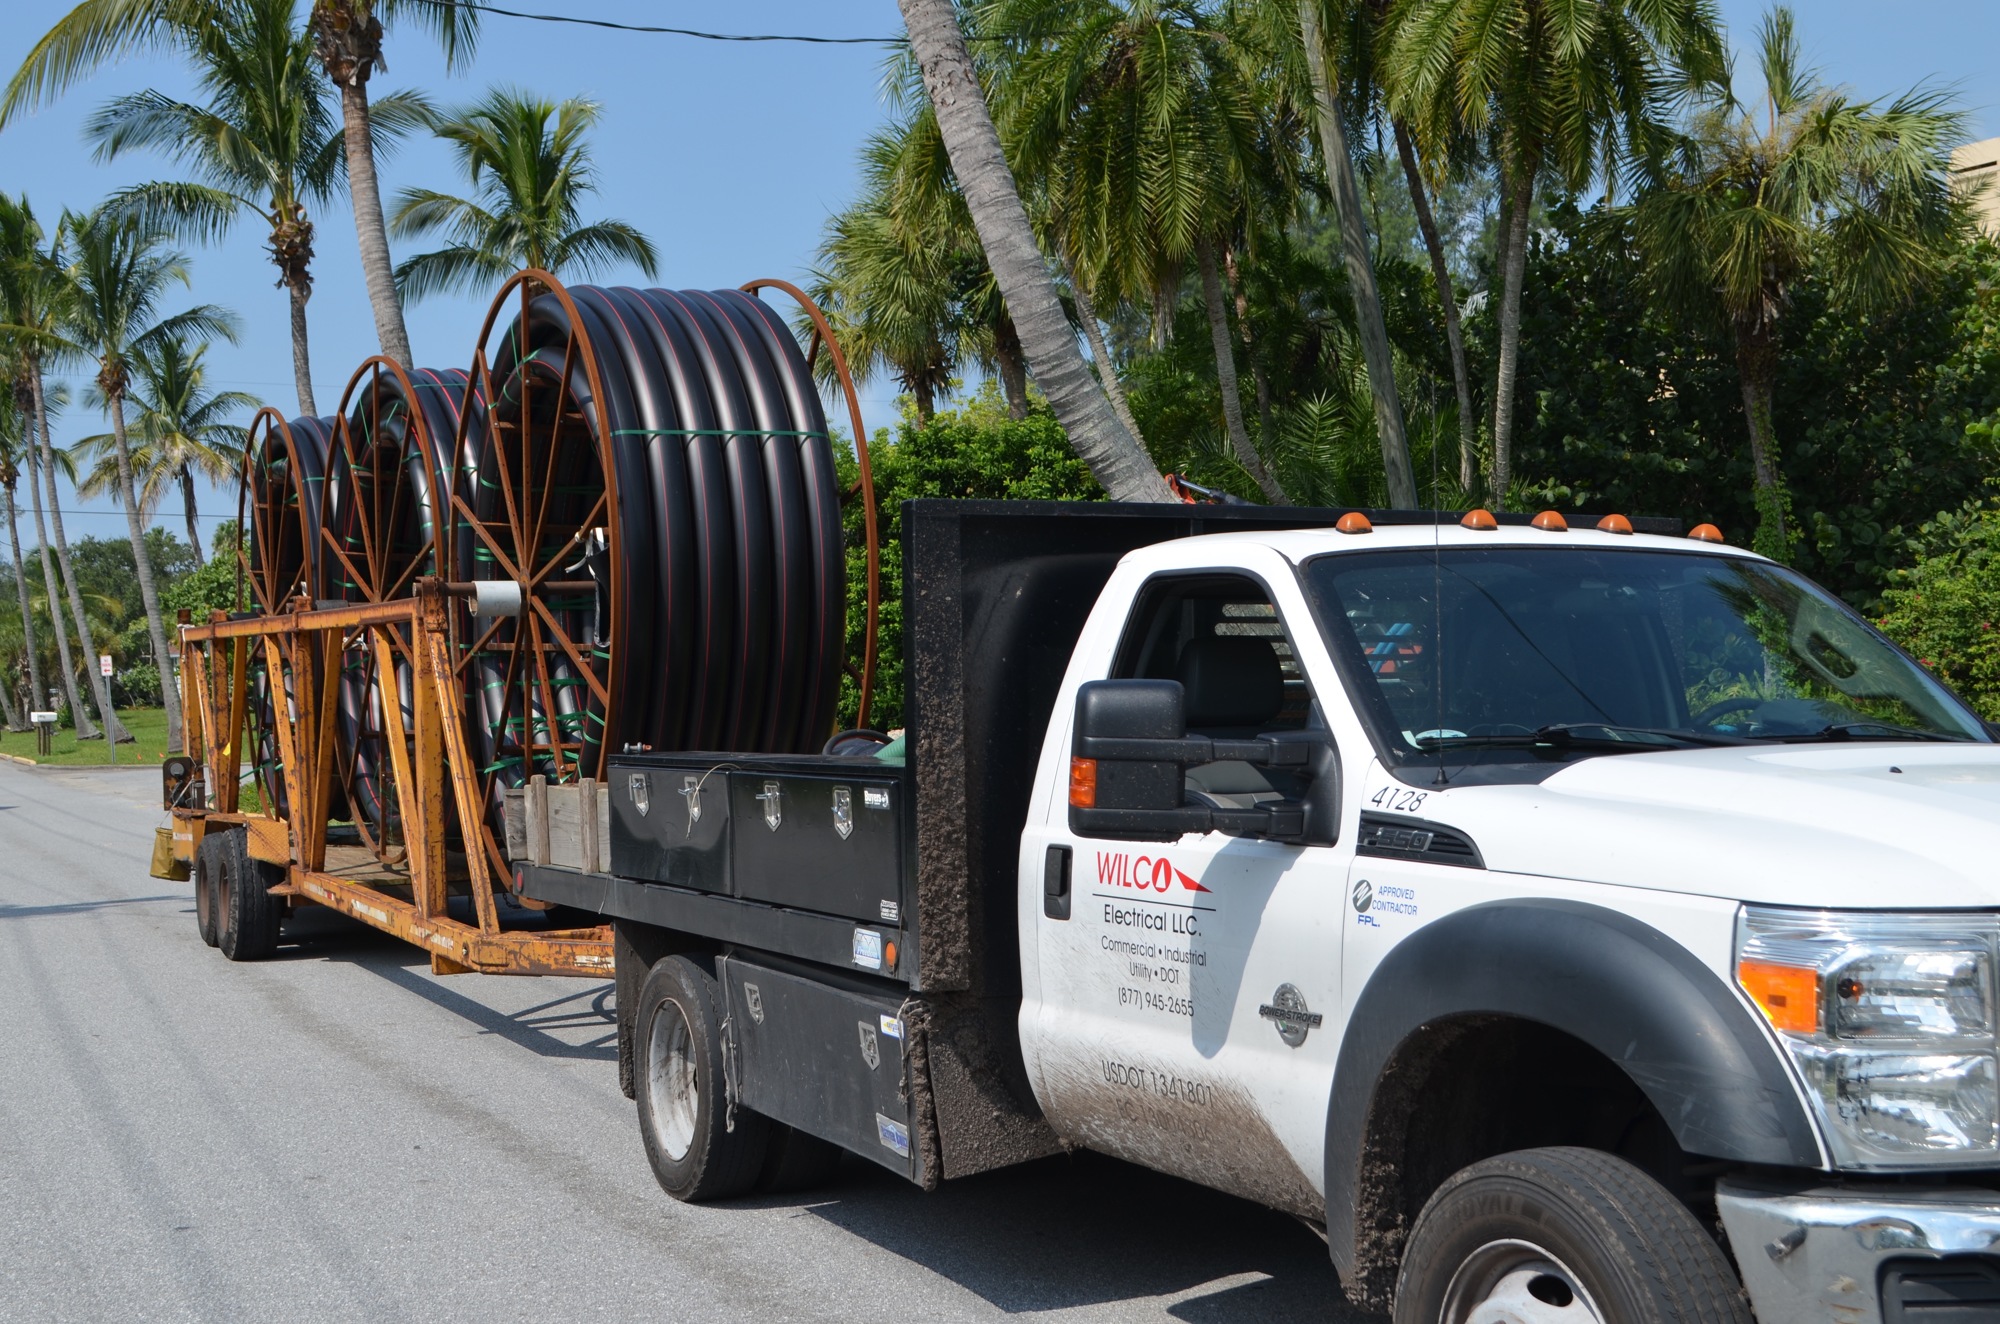 Wilco Electrical is the town's underground utilities contractor.